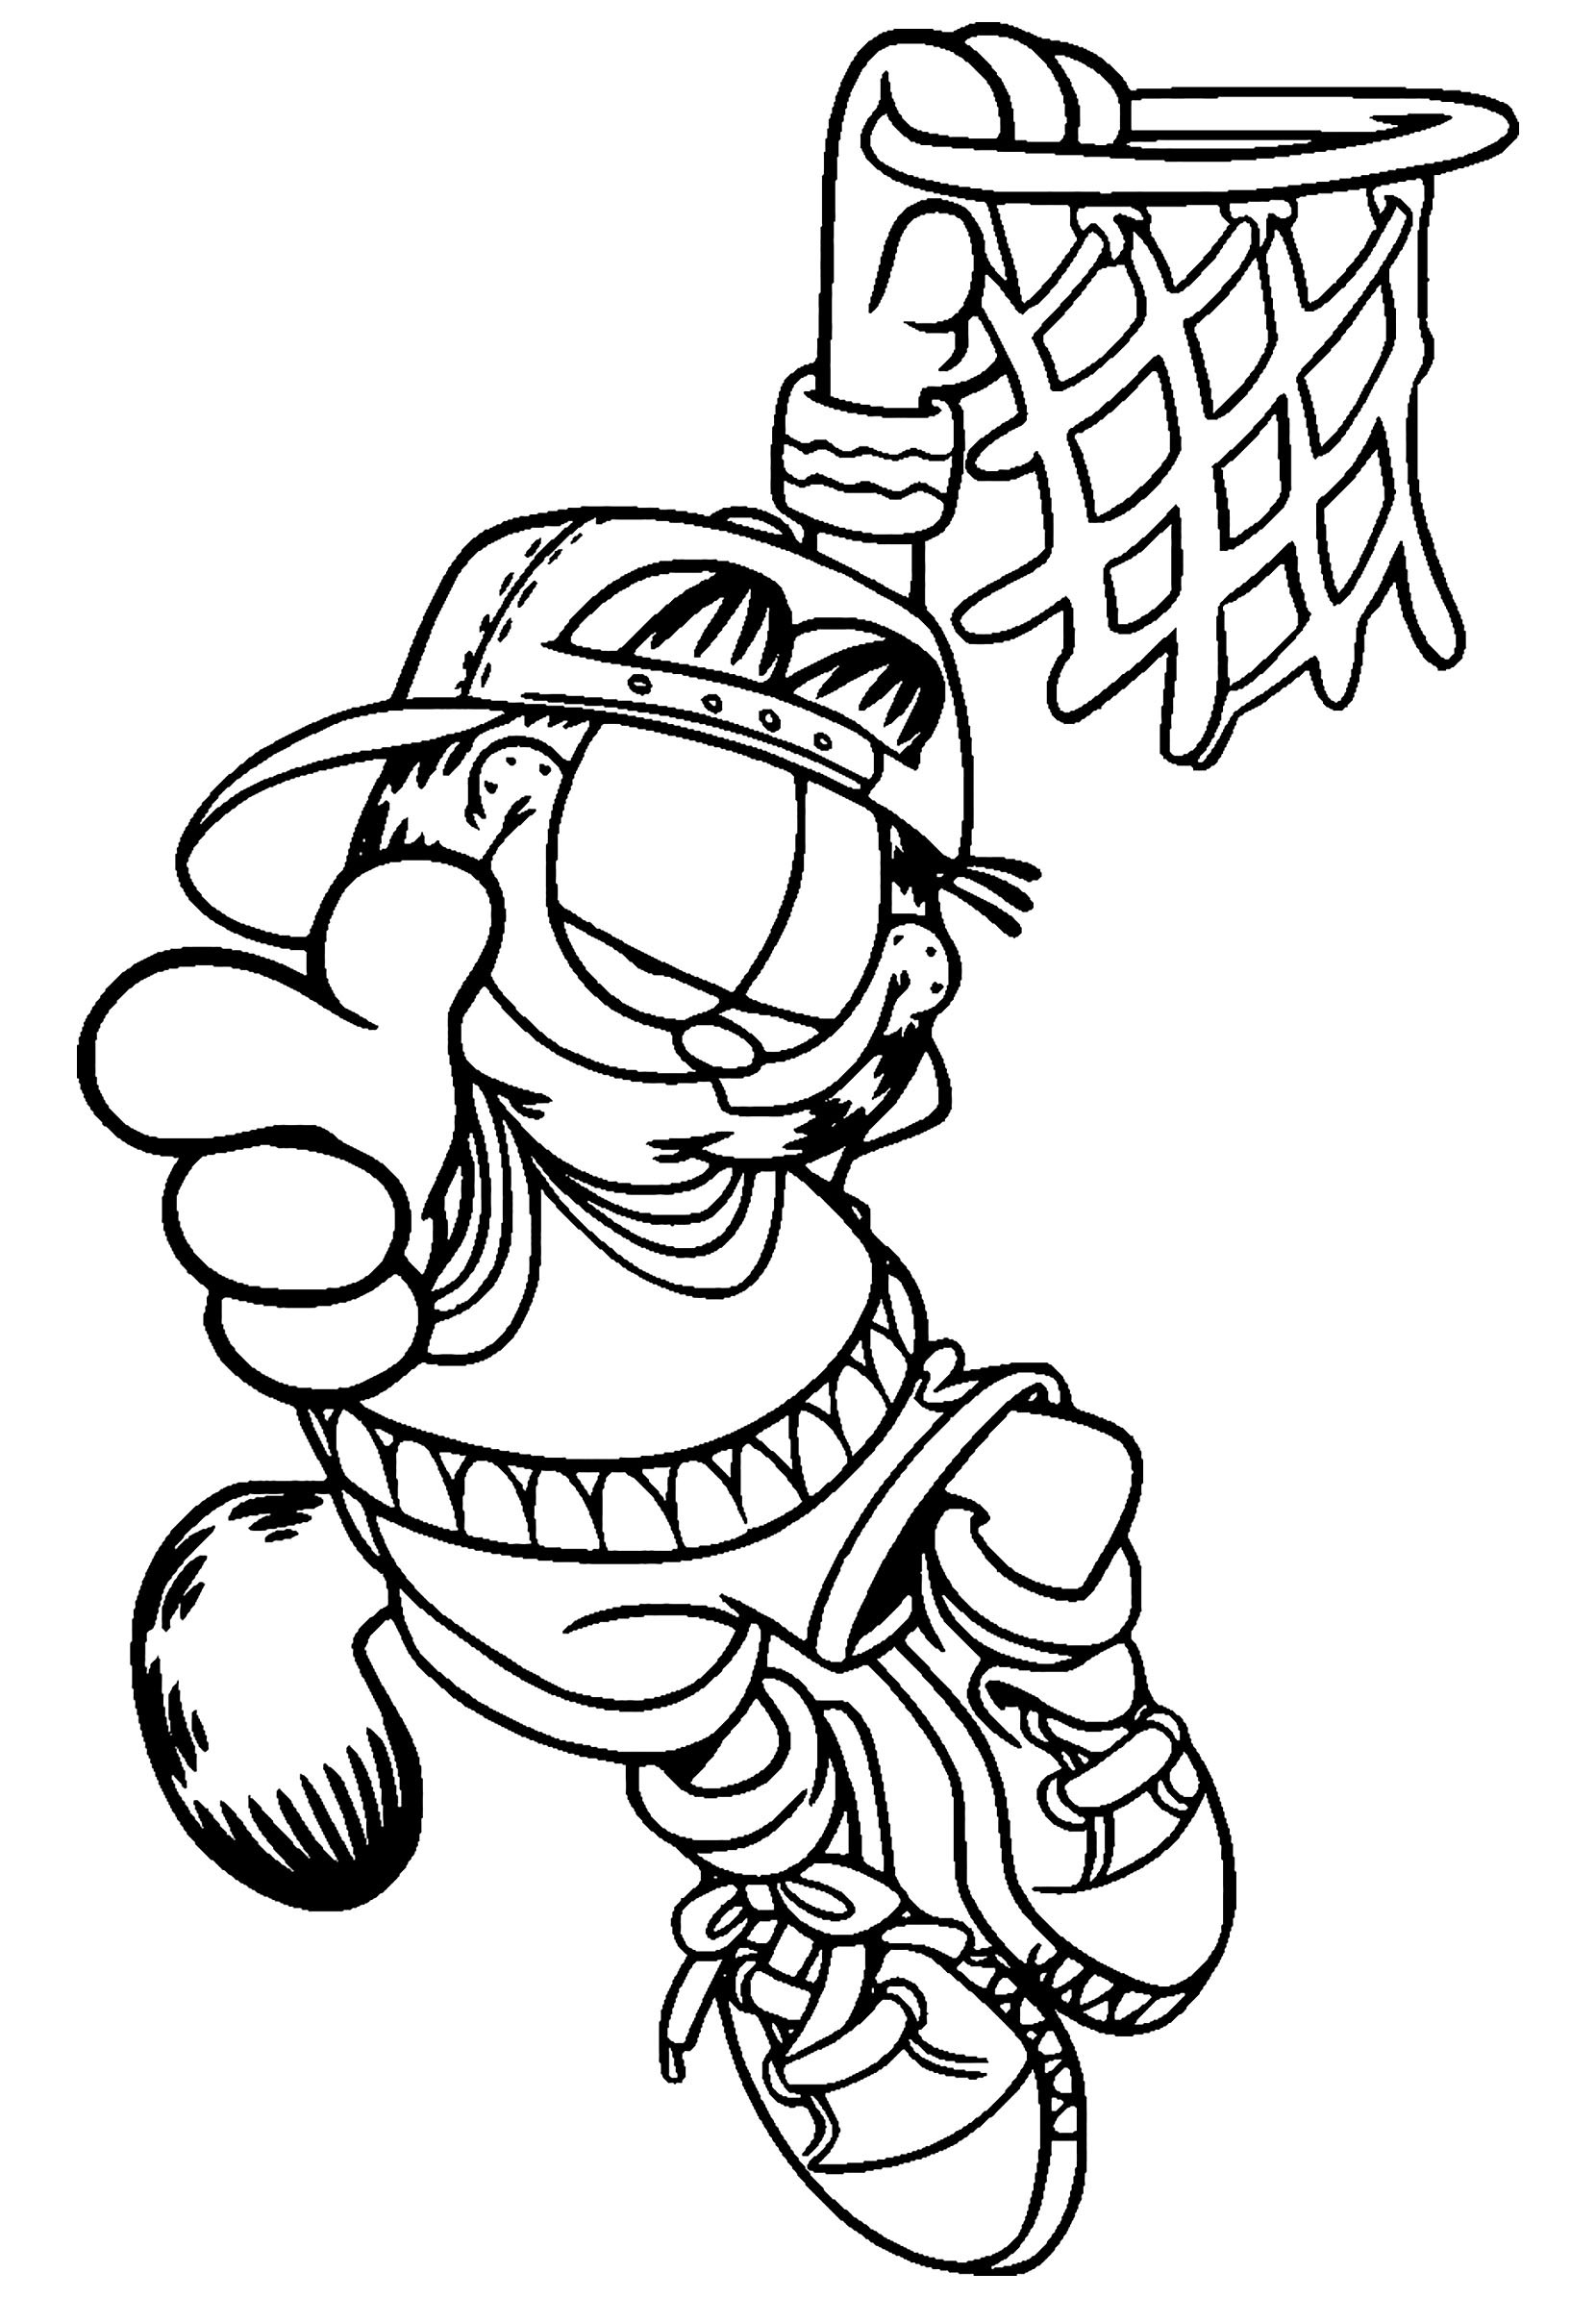 Coloring Sheets Kids
 Garfield to Garfield Kids Coloring Pages